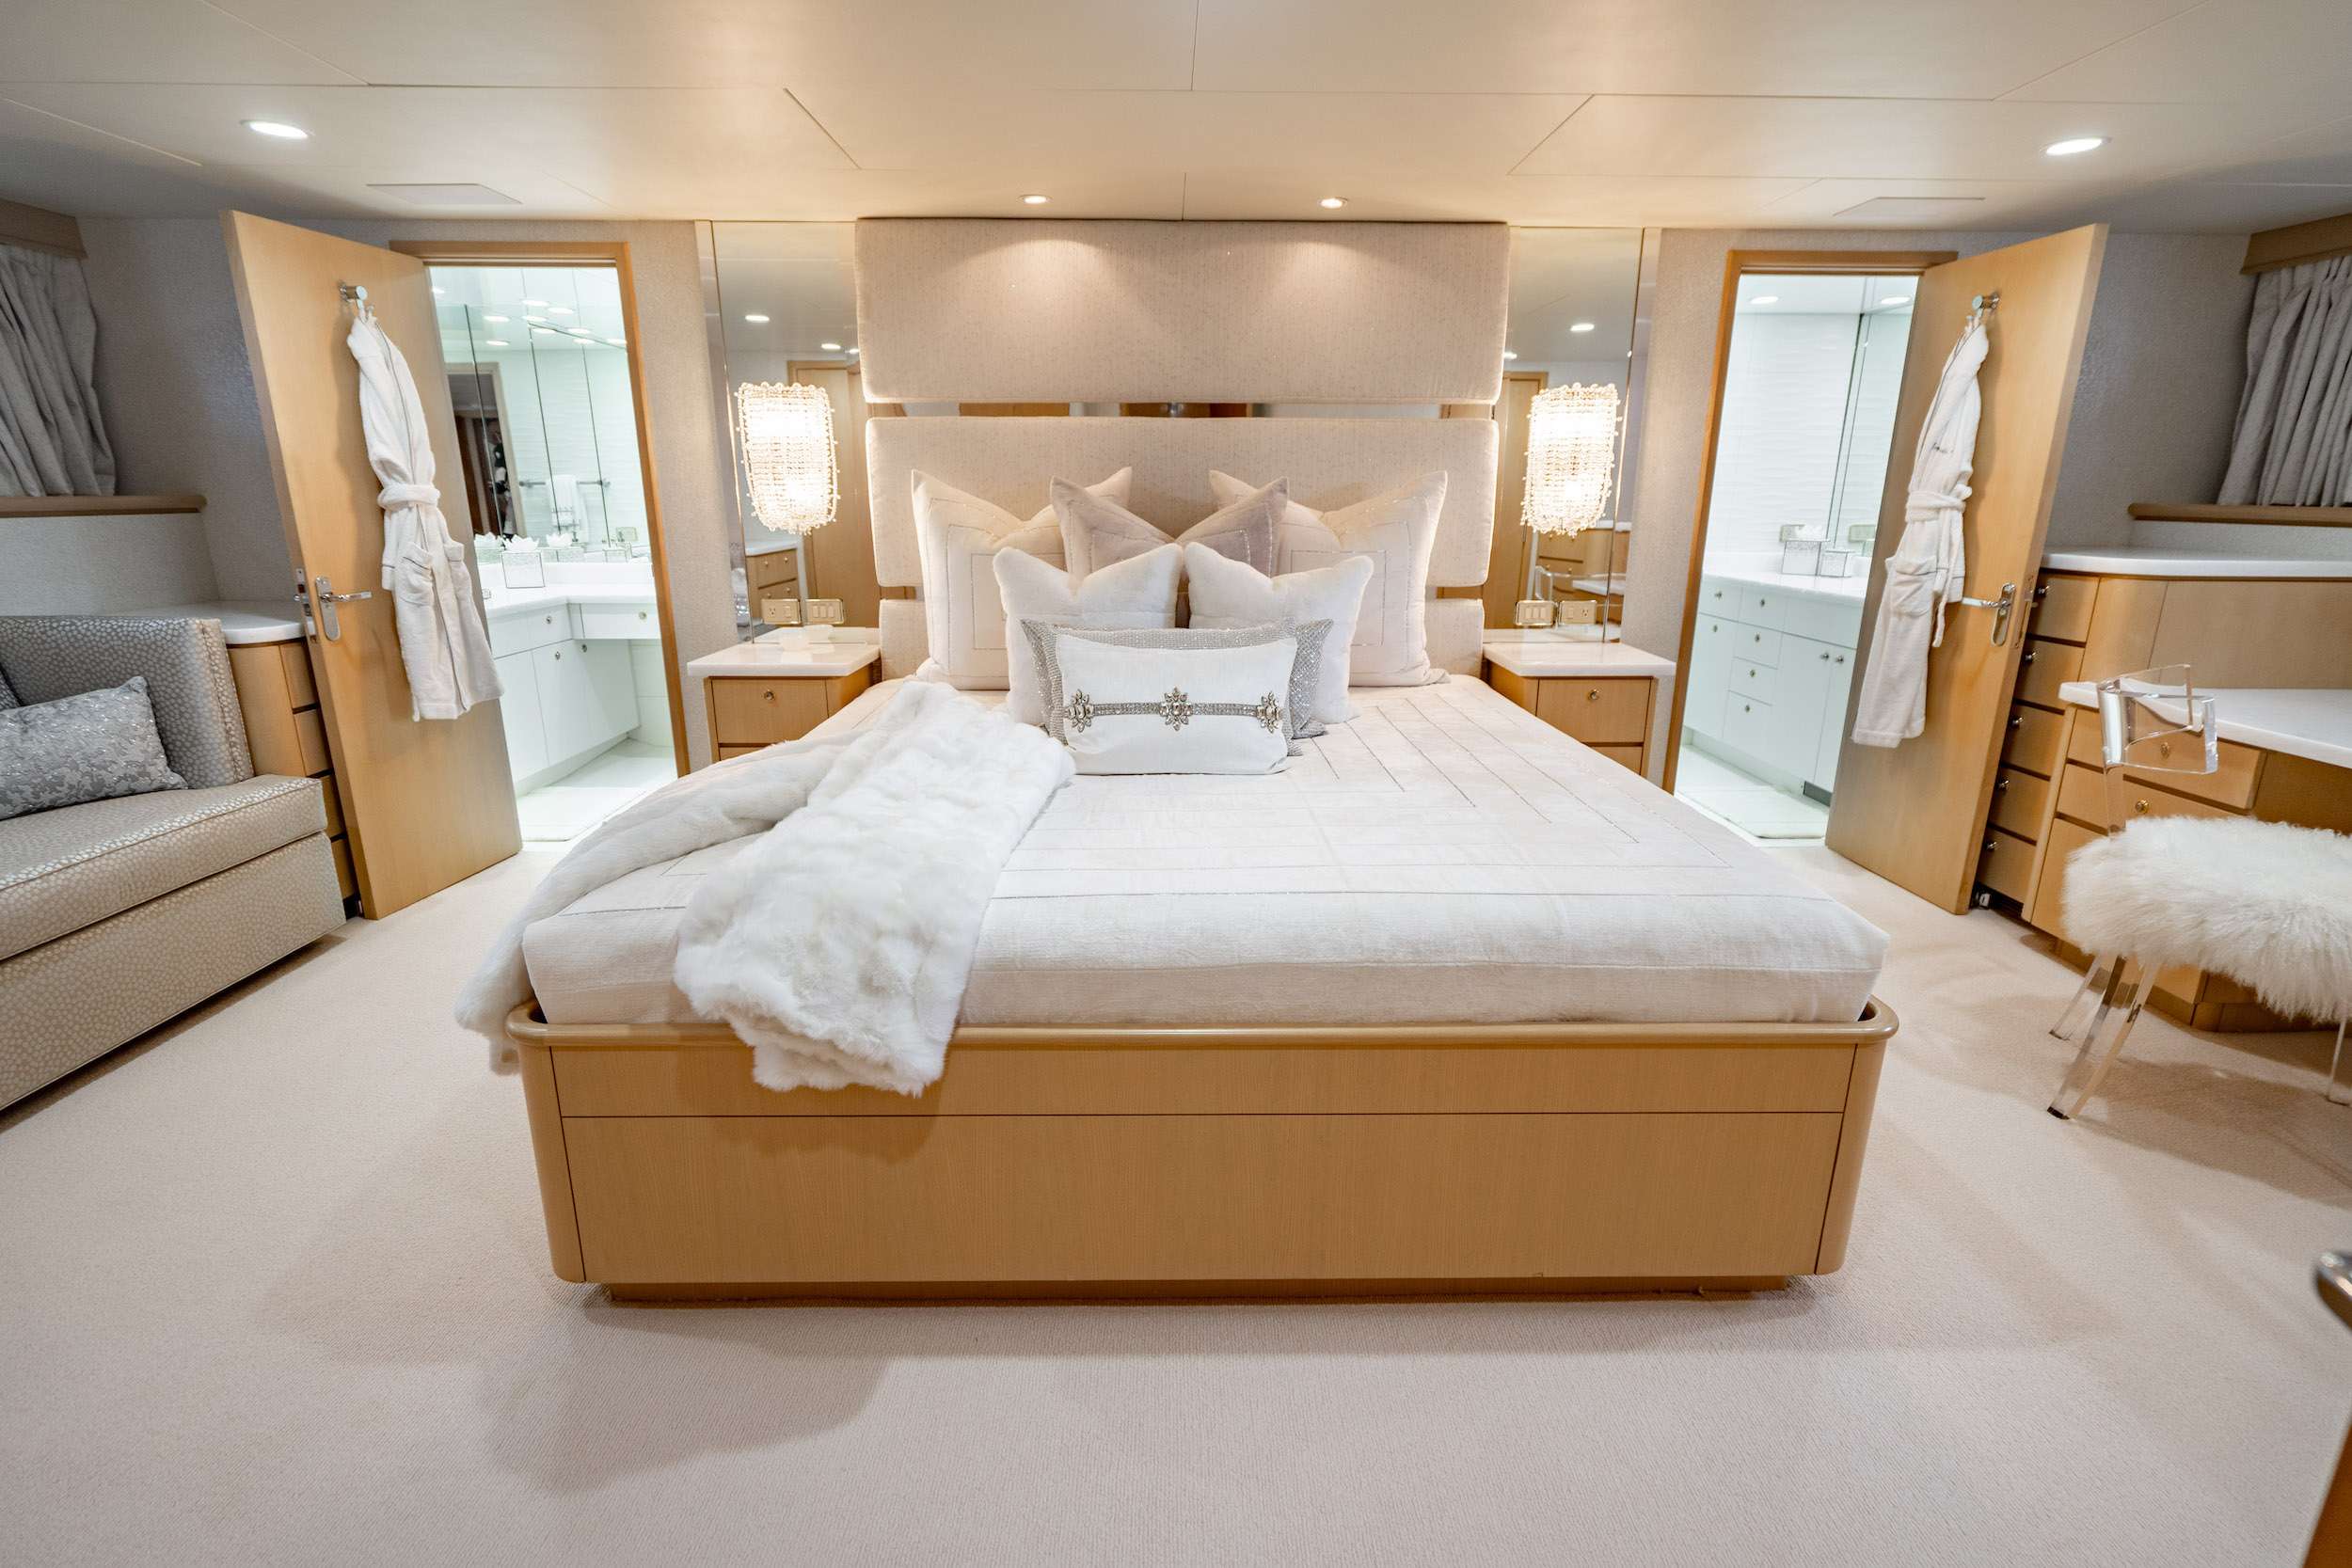 GALE WINDS Yacht Charter - Master Stateroom